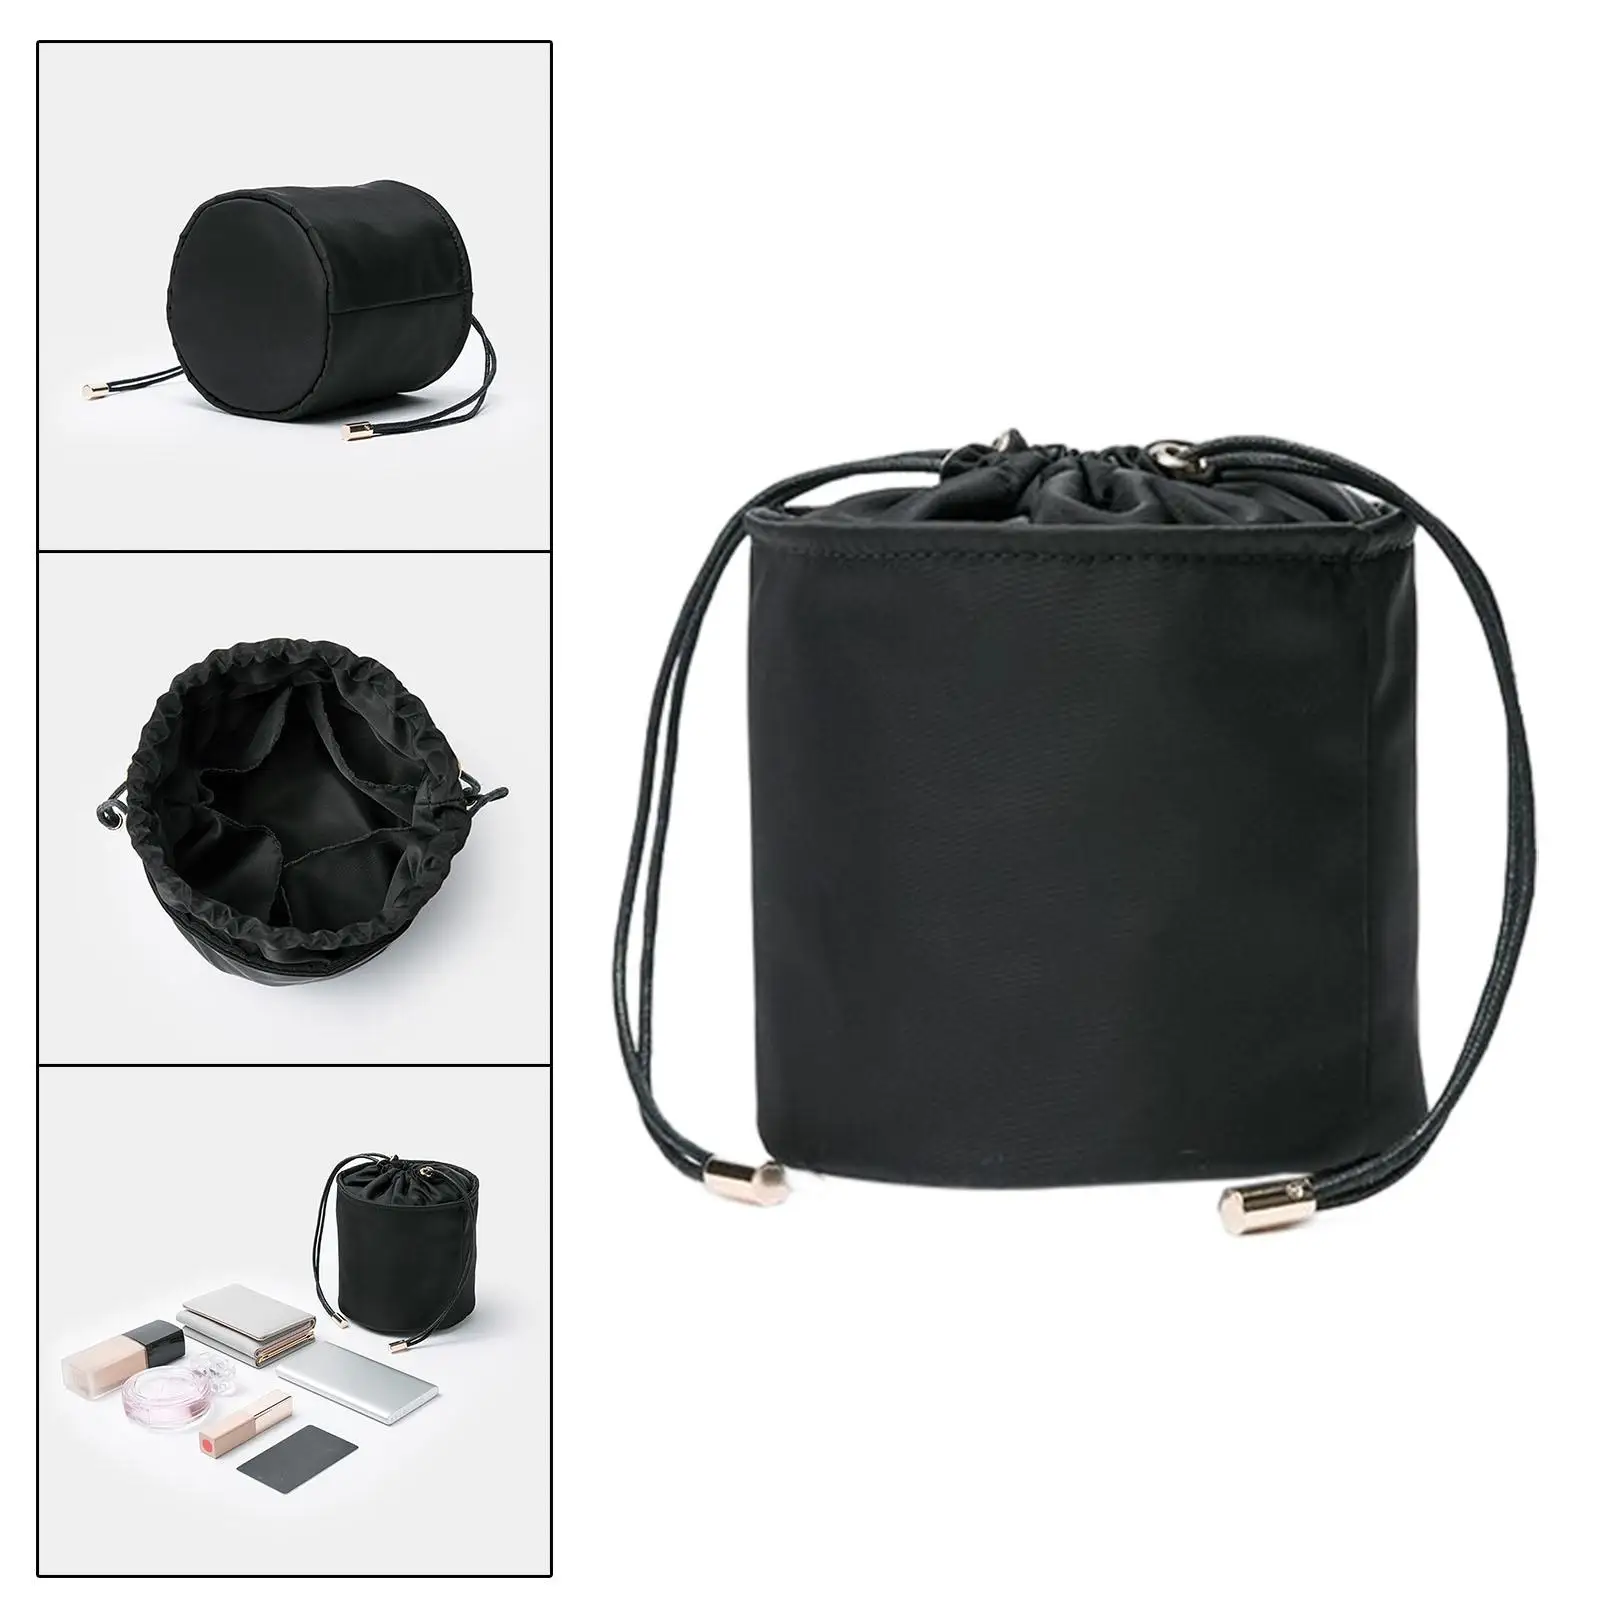 Portable Travel Makeup Bags Drawstring Toiletry Bucket Organizer Cosmetic Case Storage Pouch Makeup Organizer for Women Wife